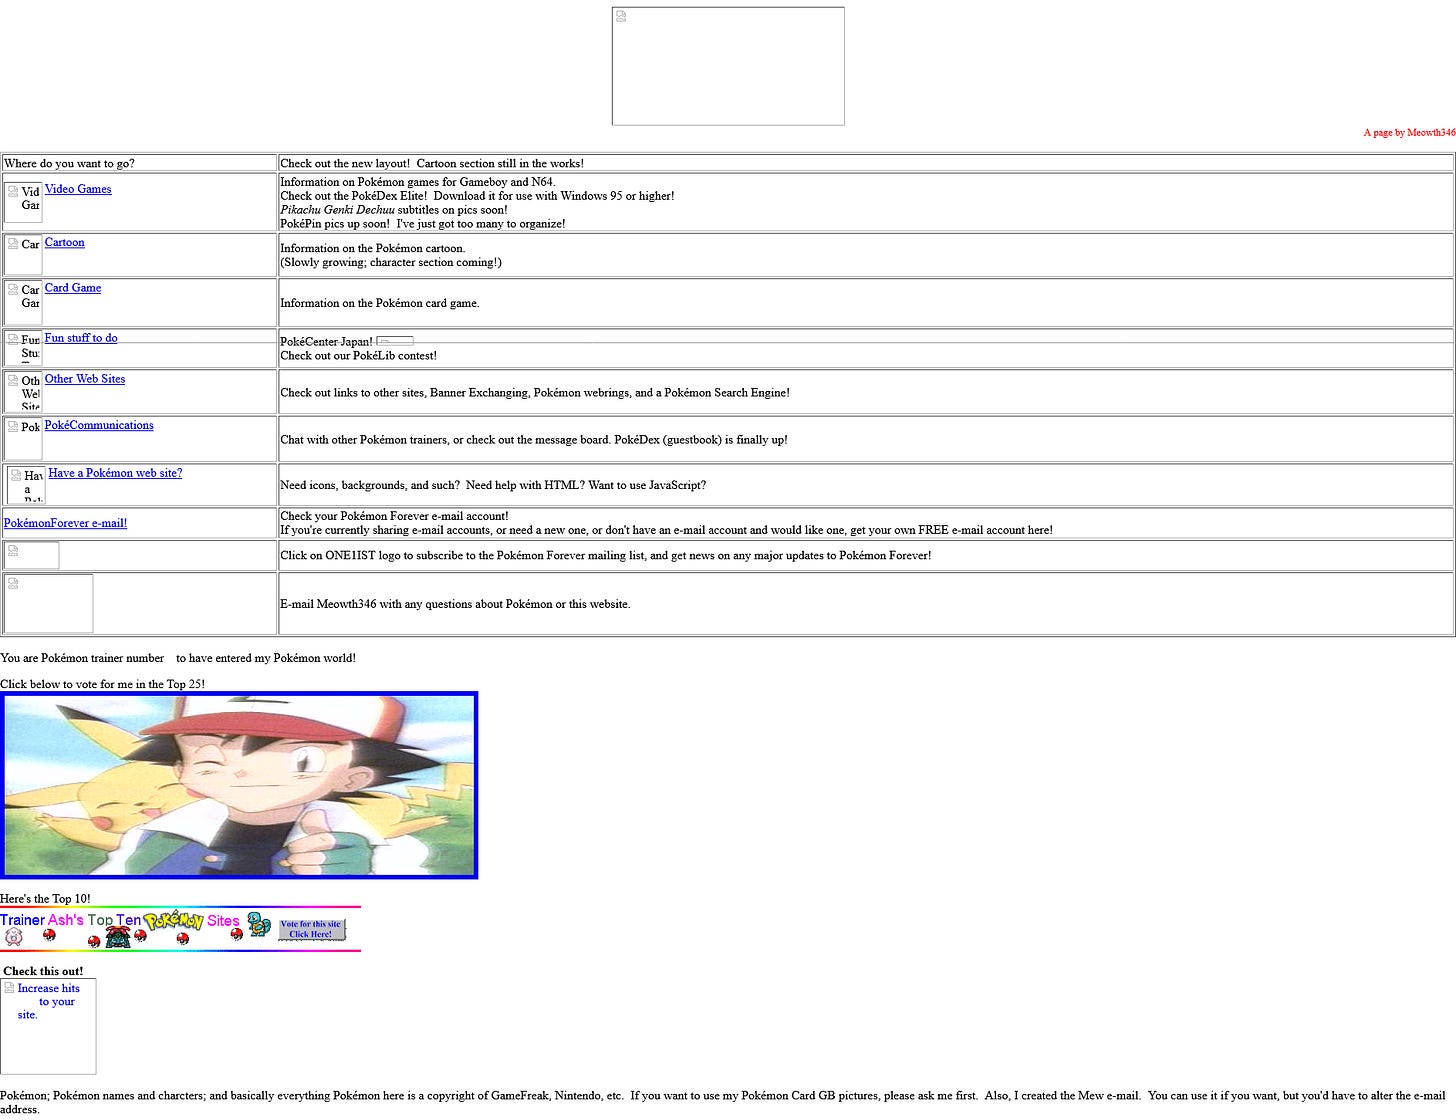 What remains of a very early version of Pokémon Forever’s layout from April 1999